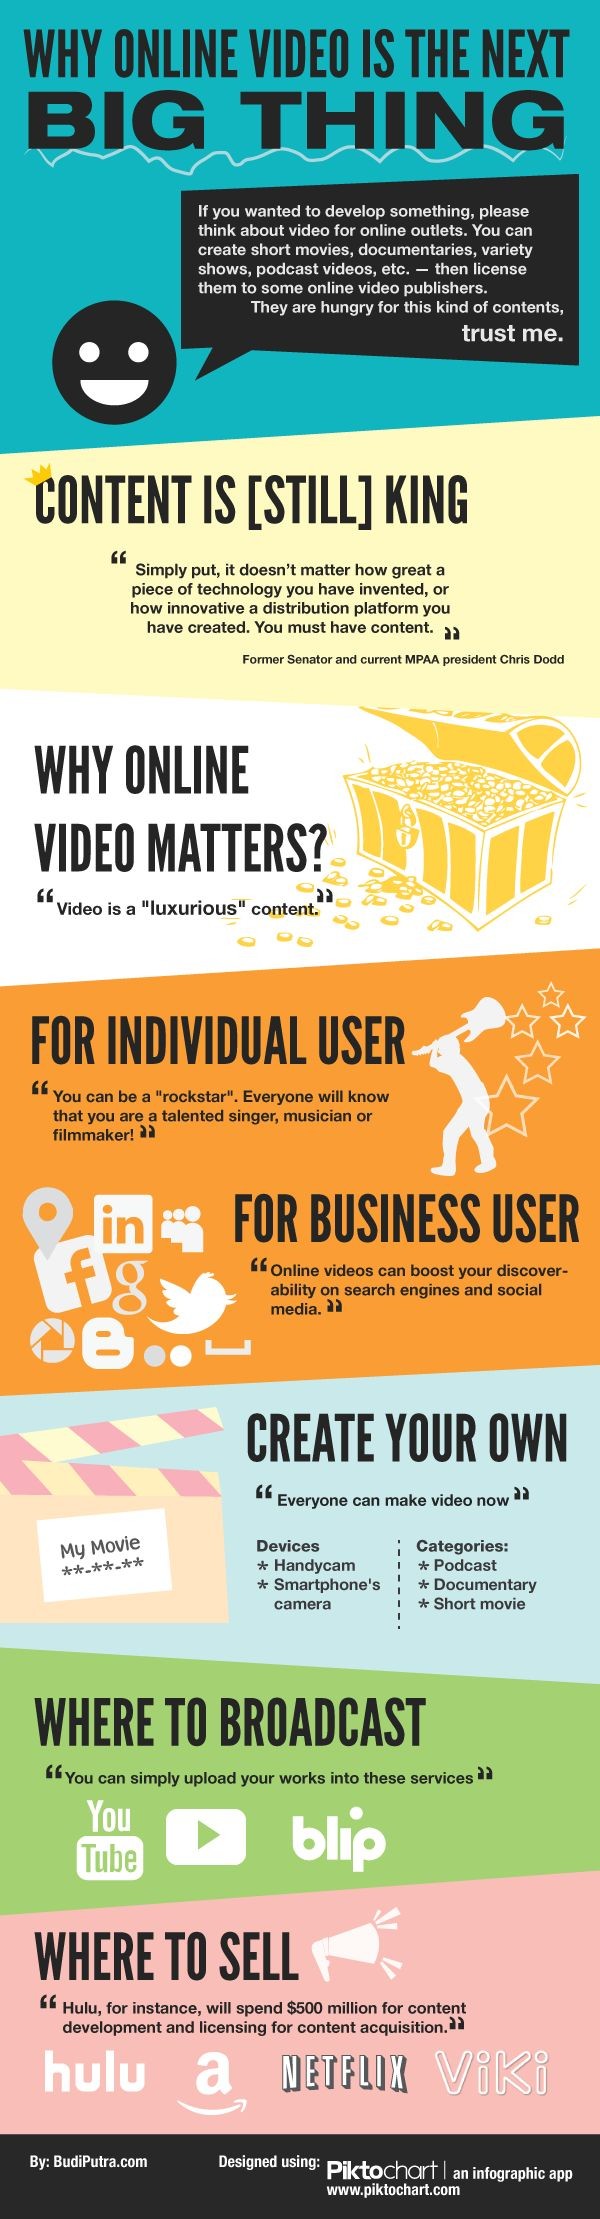 Online video is big thing. How can get started and...